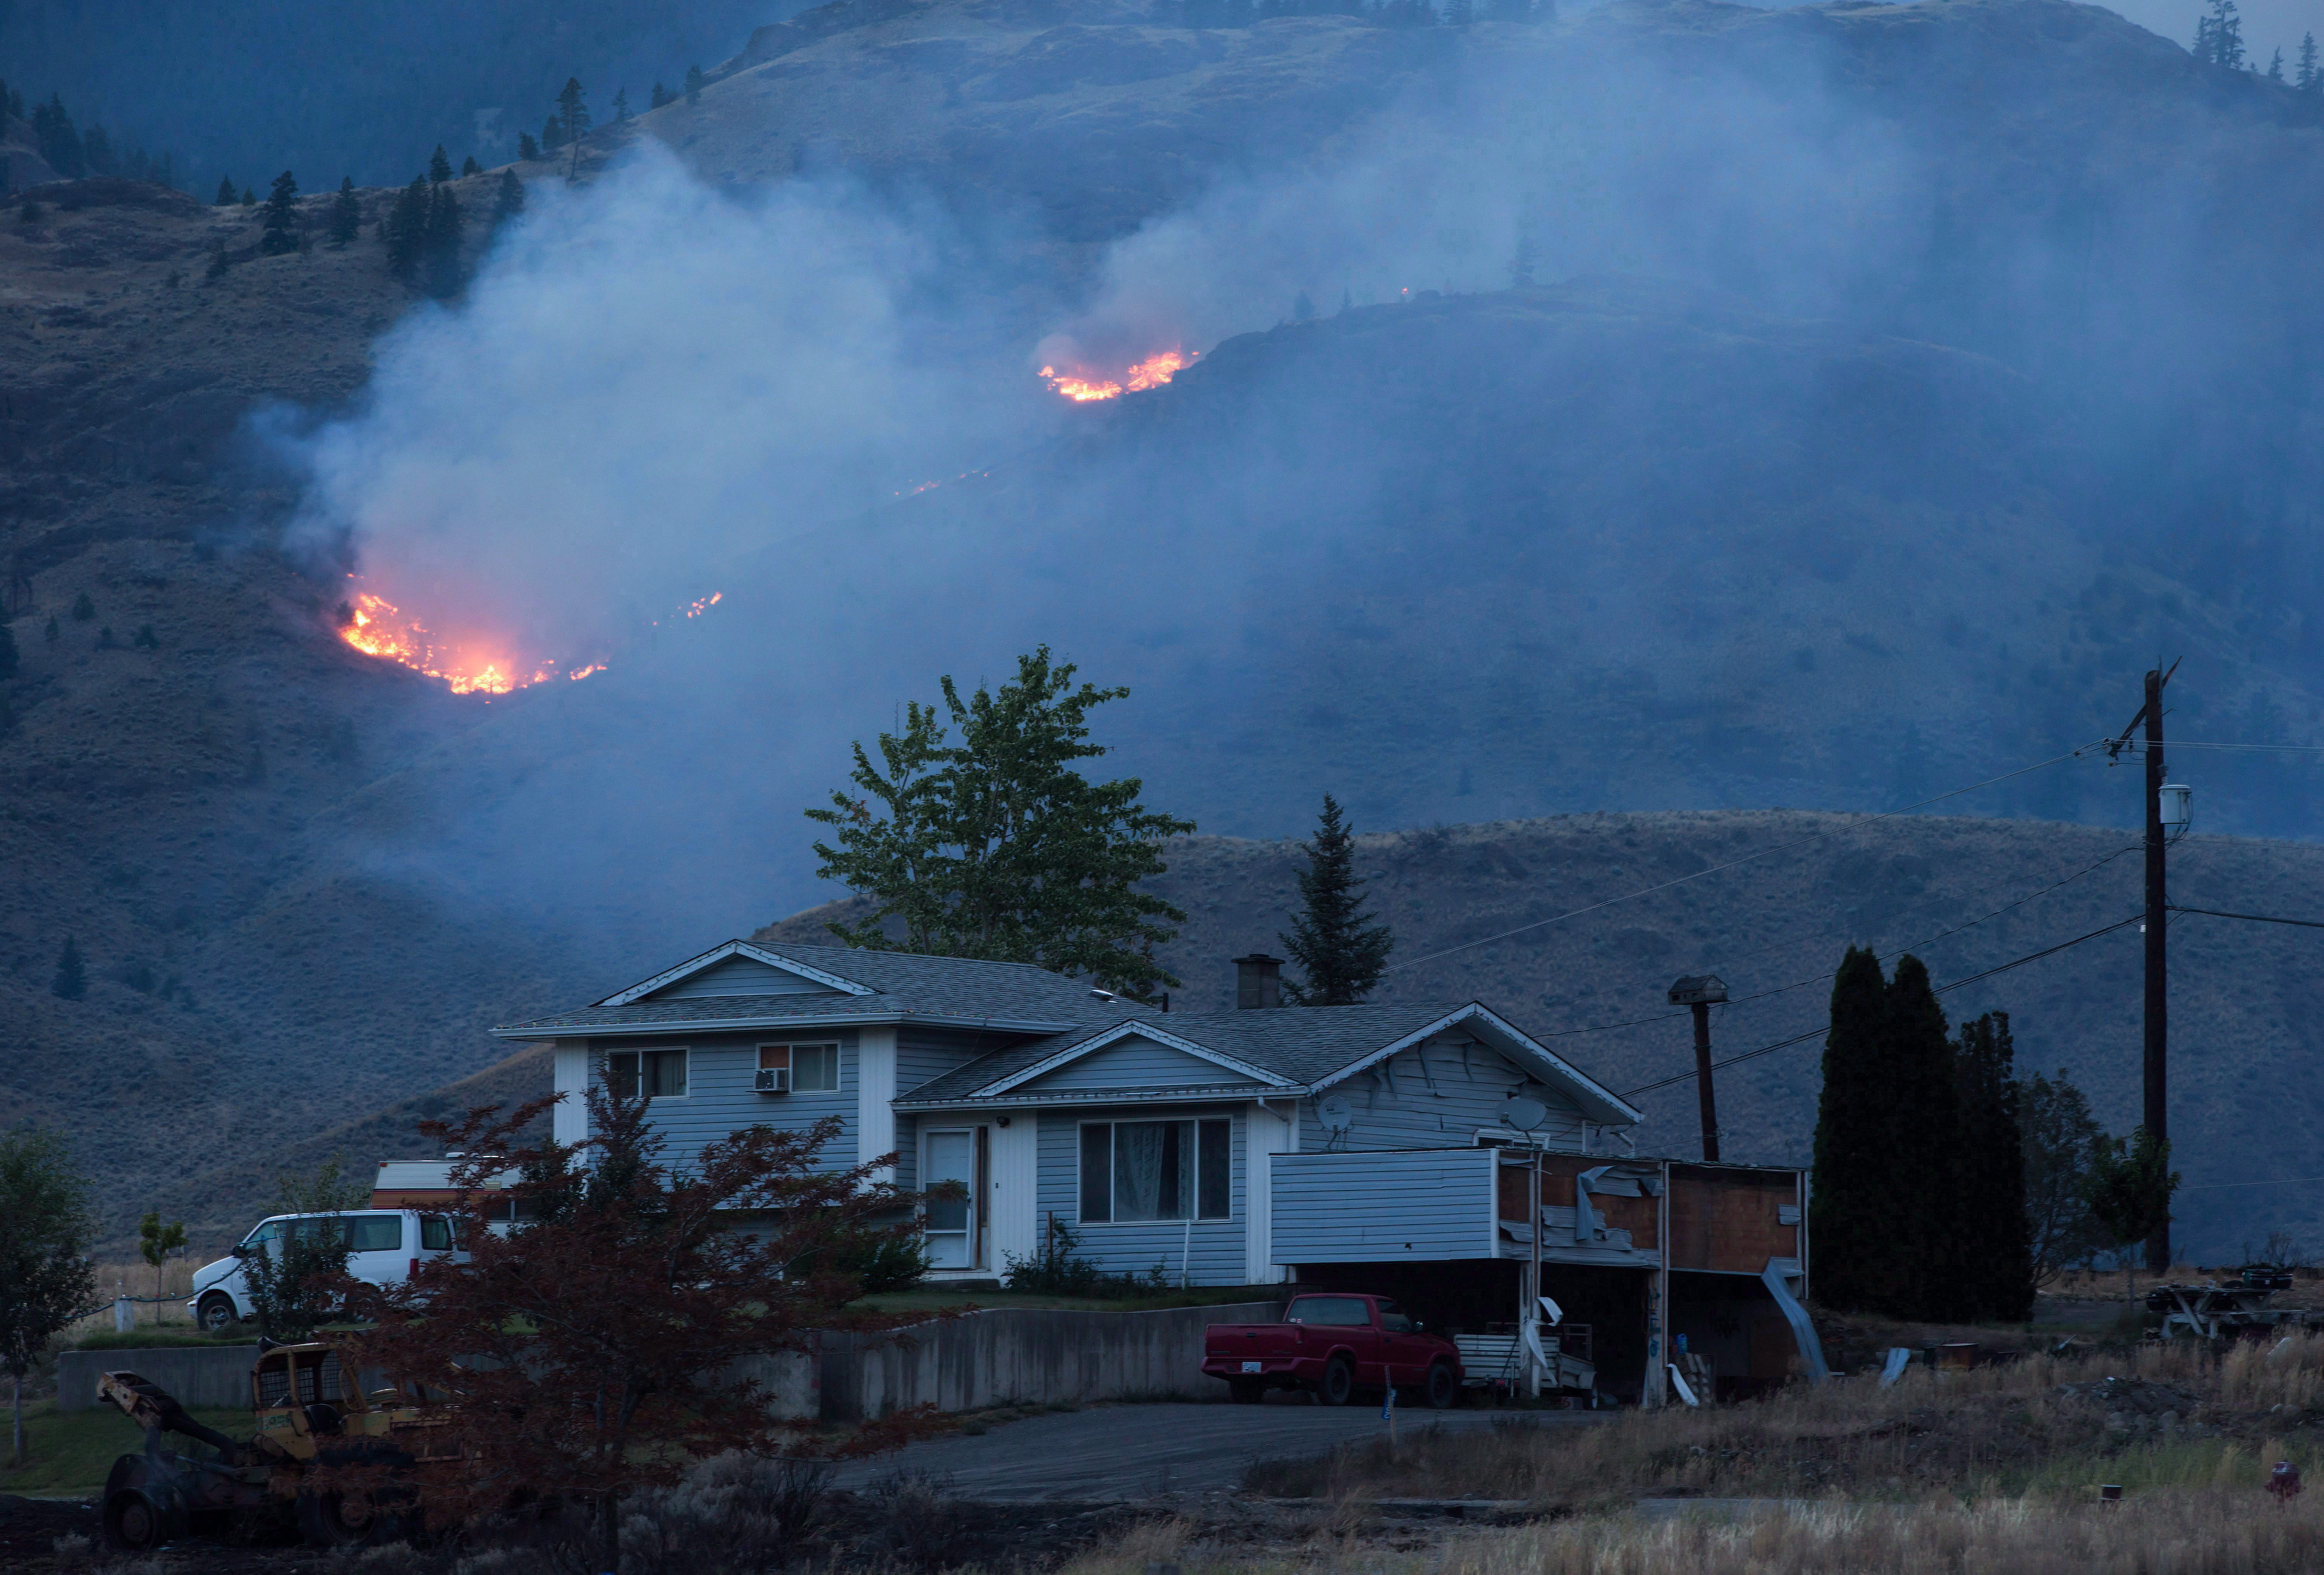 Canada ‘very vulnerable’ to wildfire damage amid record year. How to protect your home